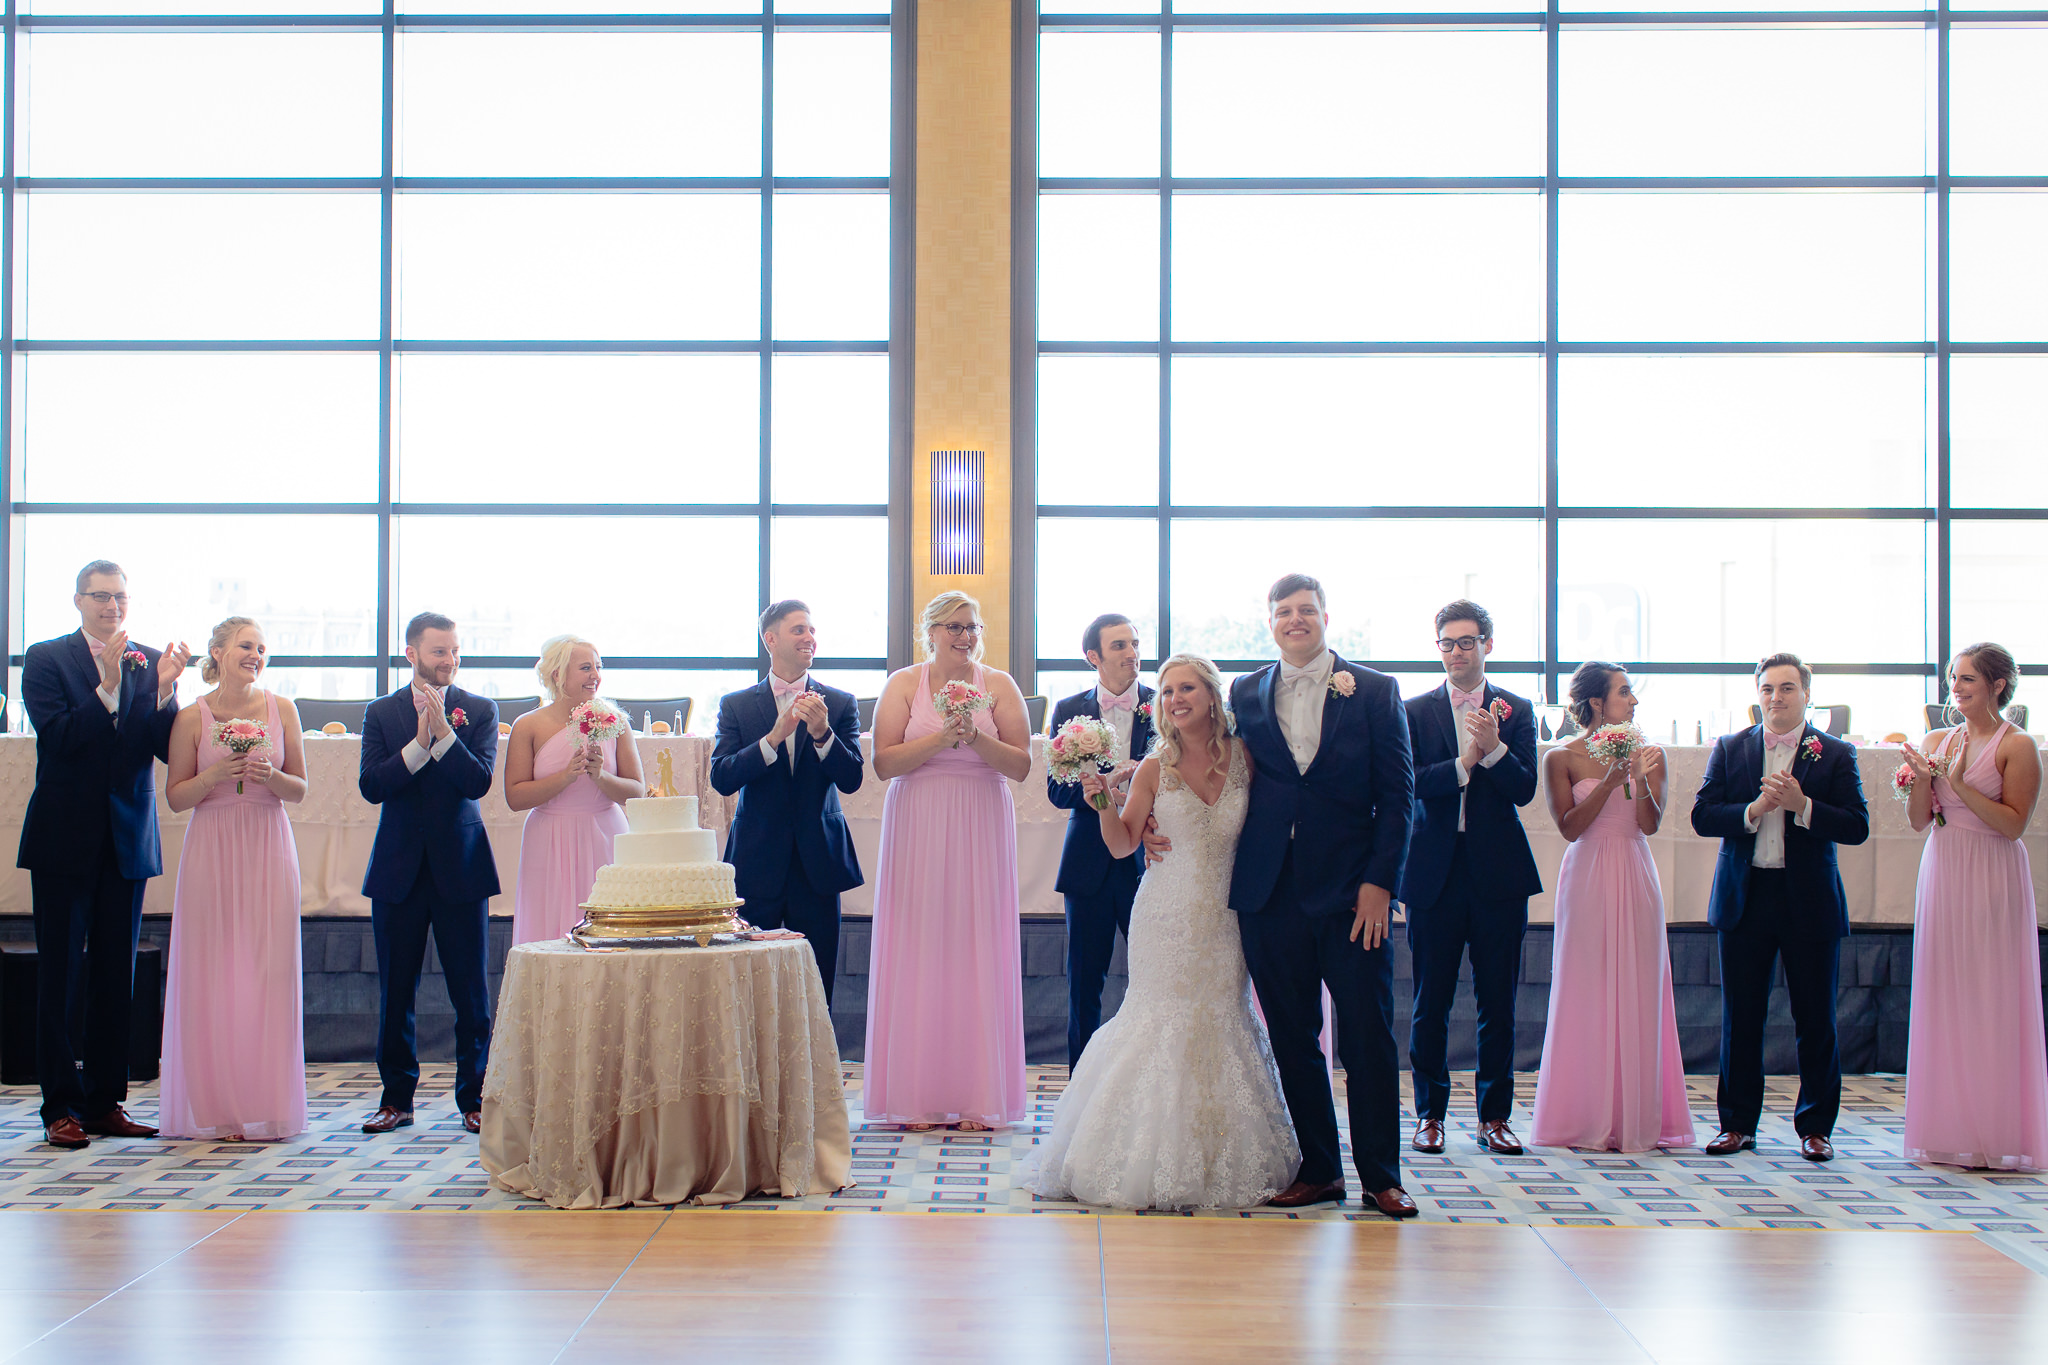 Bridal party applauds the newlyweds at a Duquesne University wedding reception